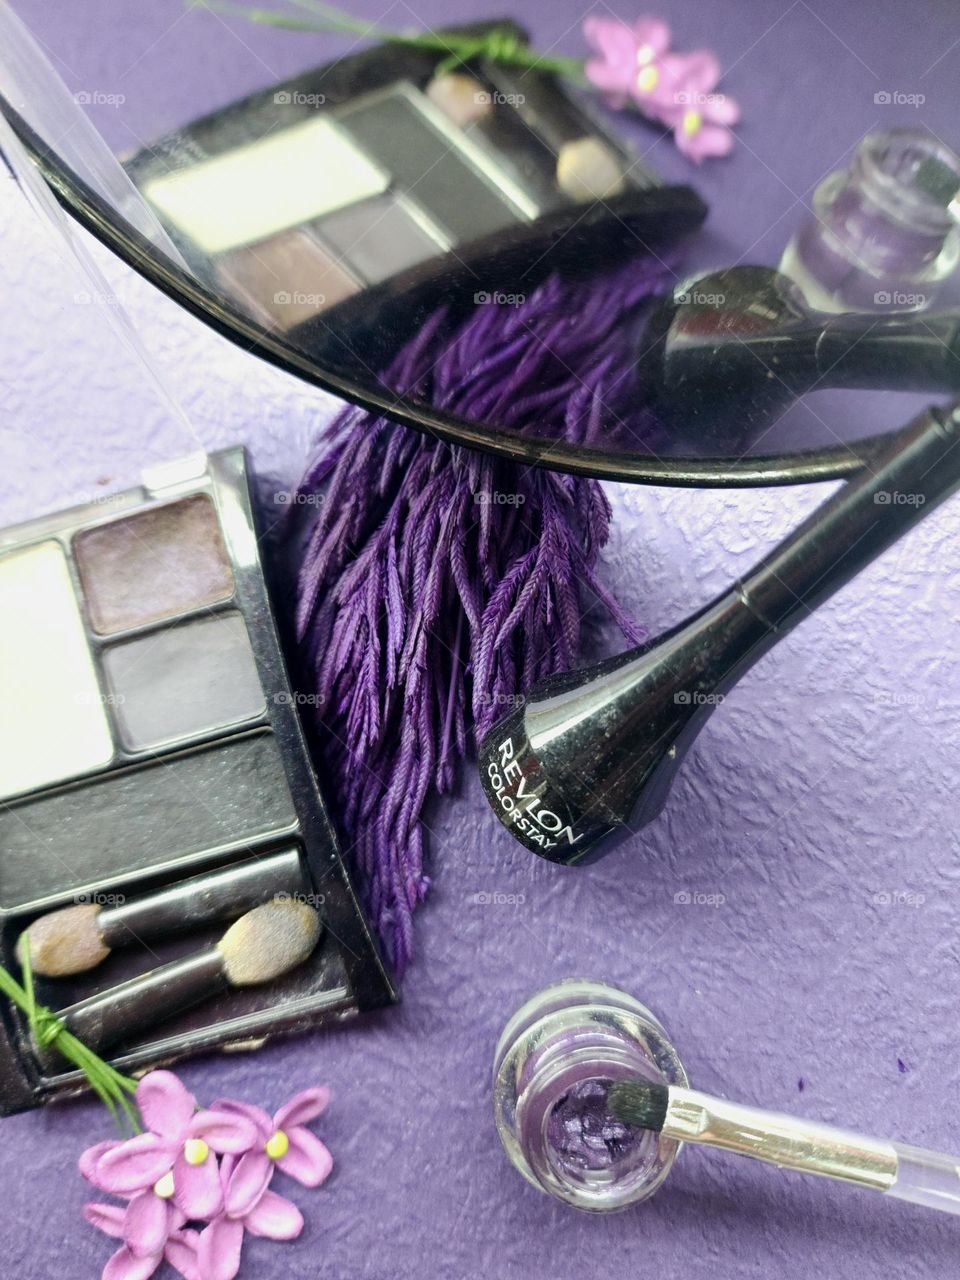 Purple themed makeup products.